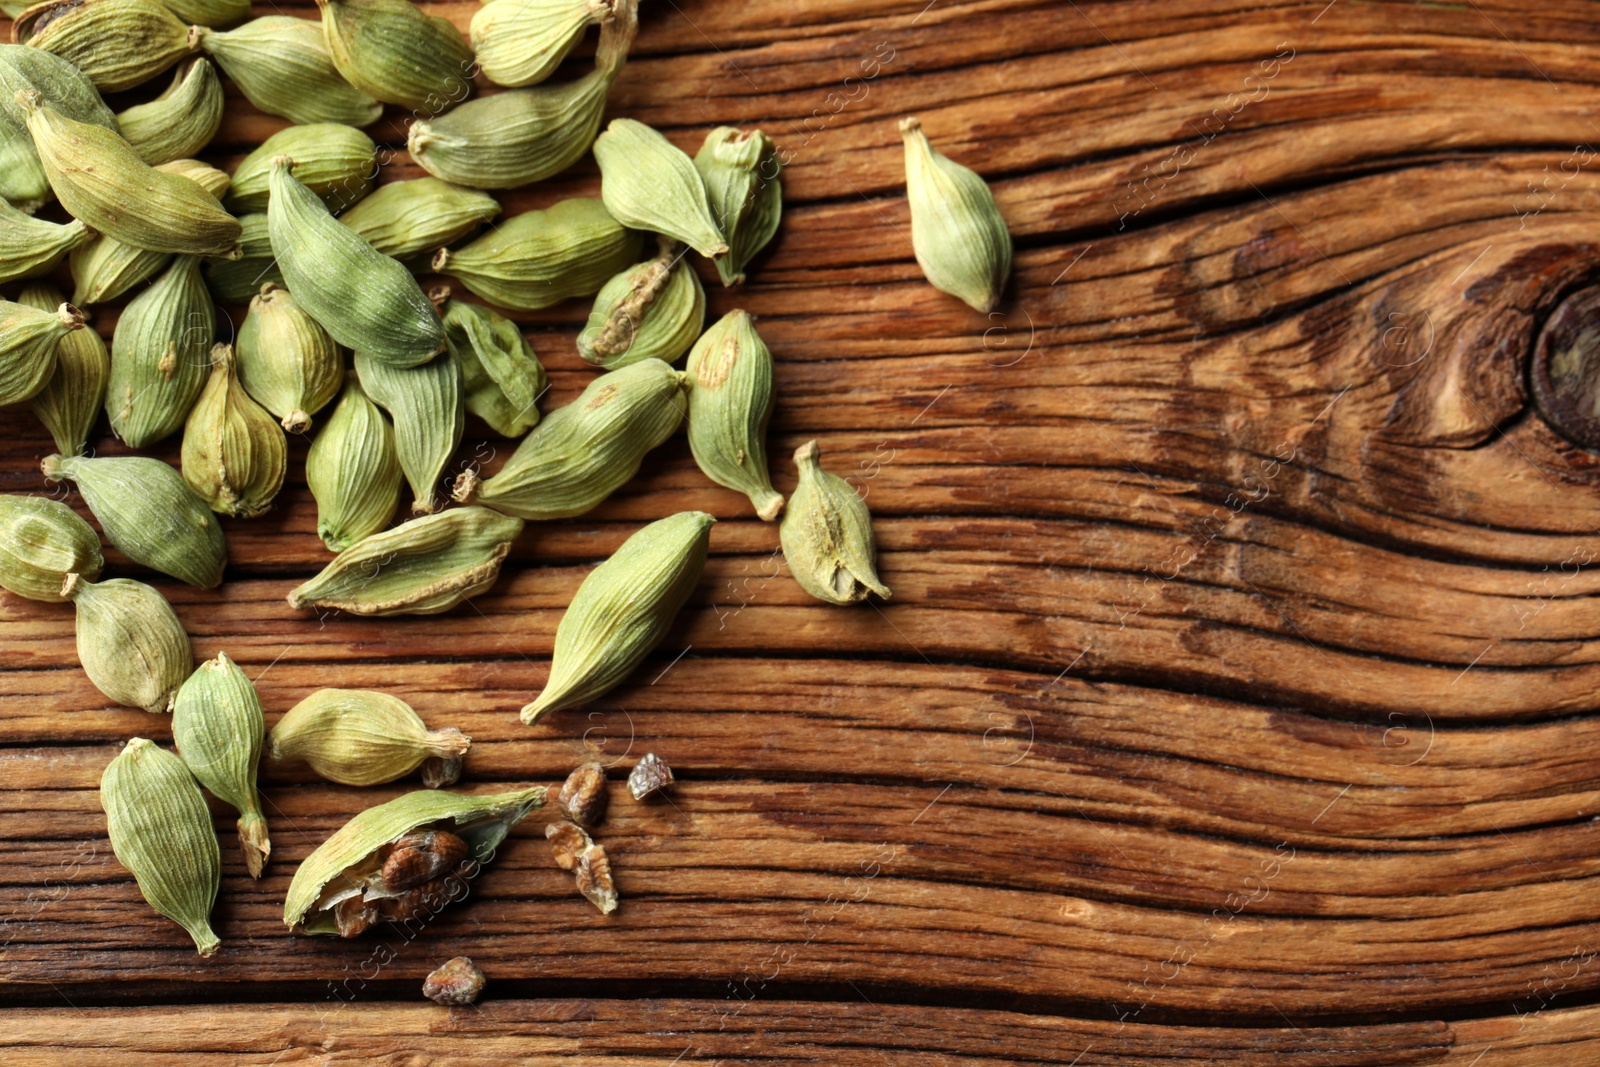 Photo of Pile of dry cardamom pods on wooden table, top view. Space for text